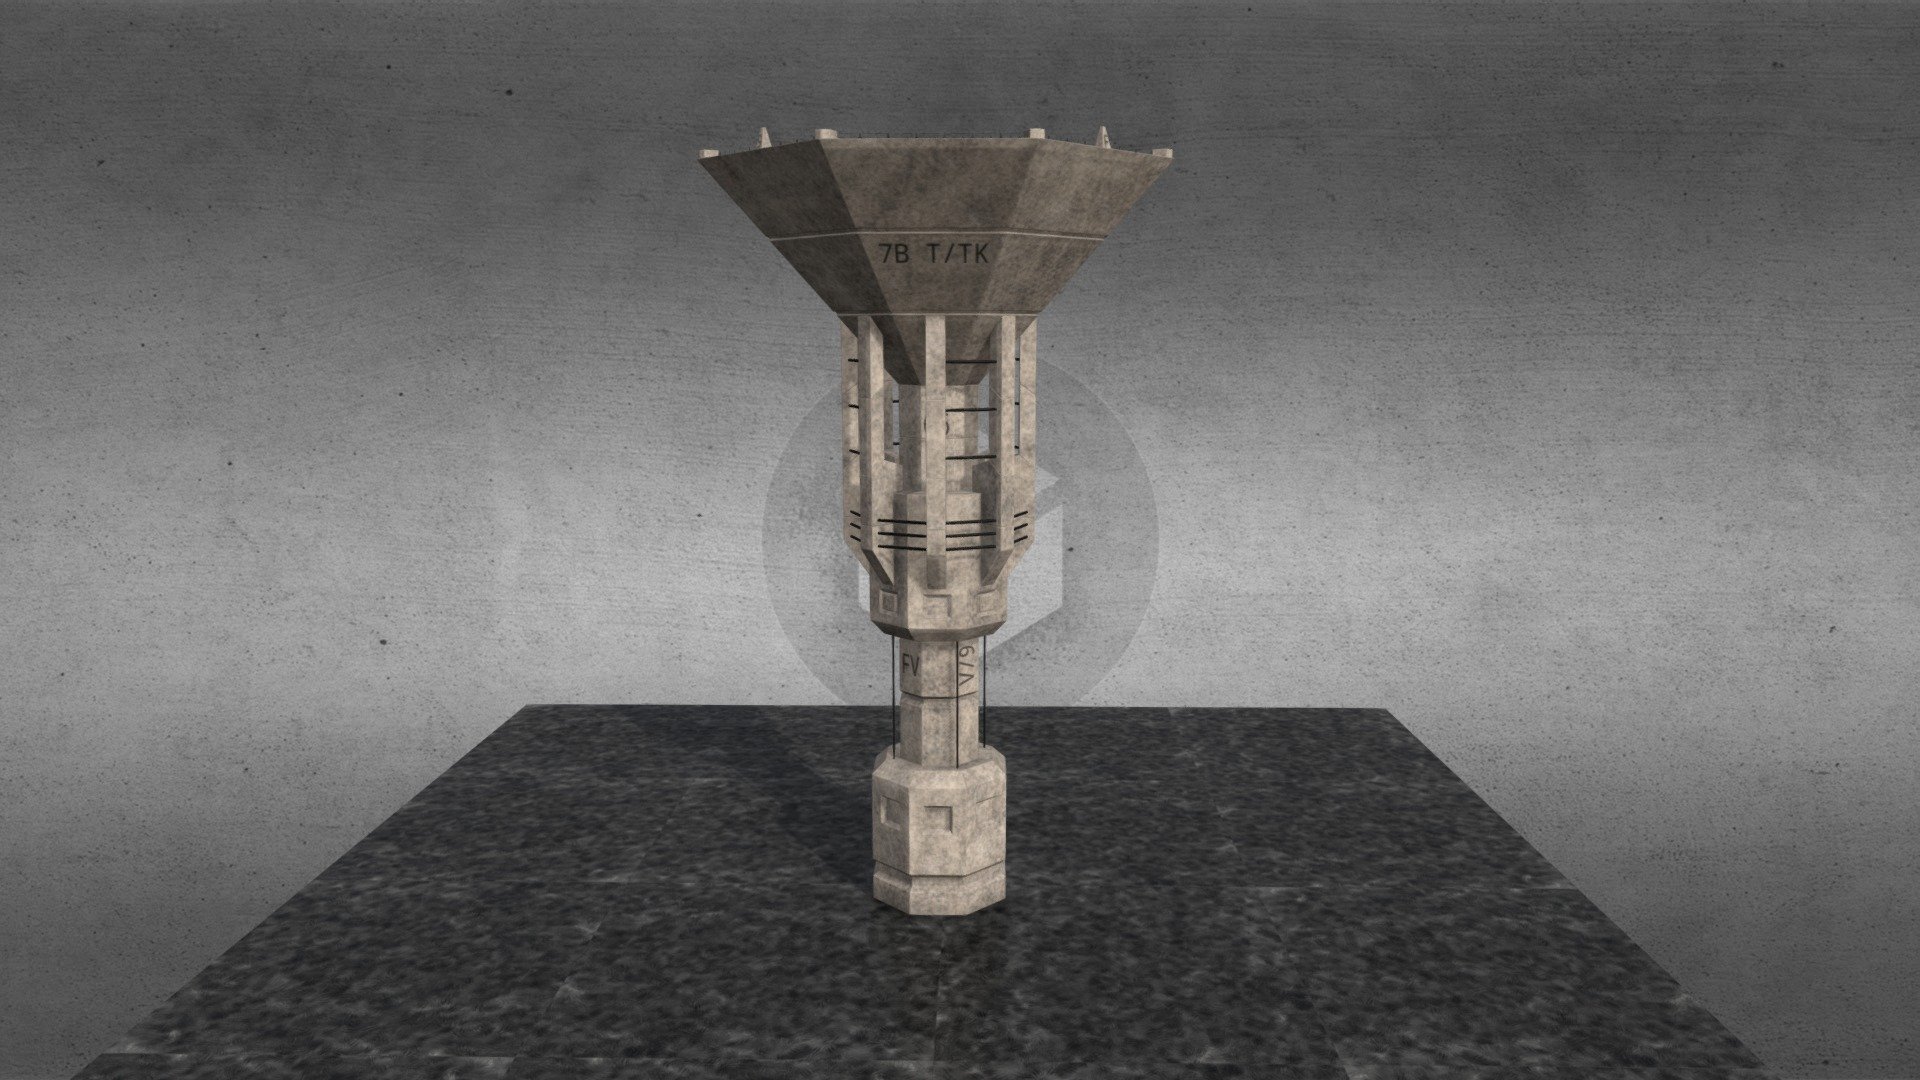 Former water tower converted into a Military-style Comms Tower.
Add some menace to your scene with this imposing concrete beast! - Comms Tower - Buy Royalty Free 3D model by Military Assets (@militaryassets) 3d model